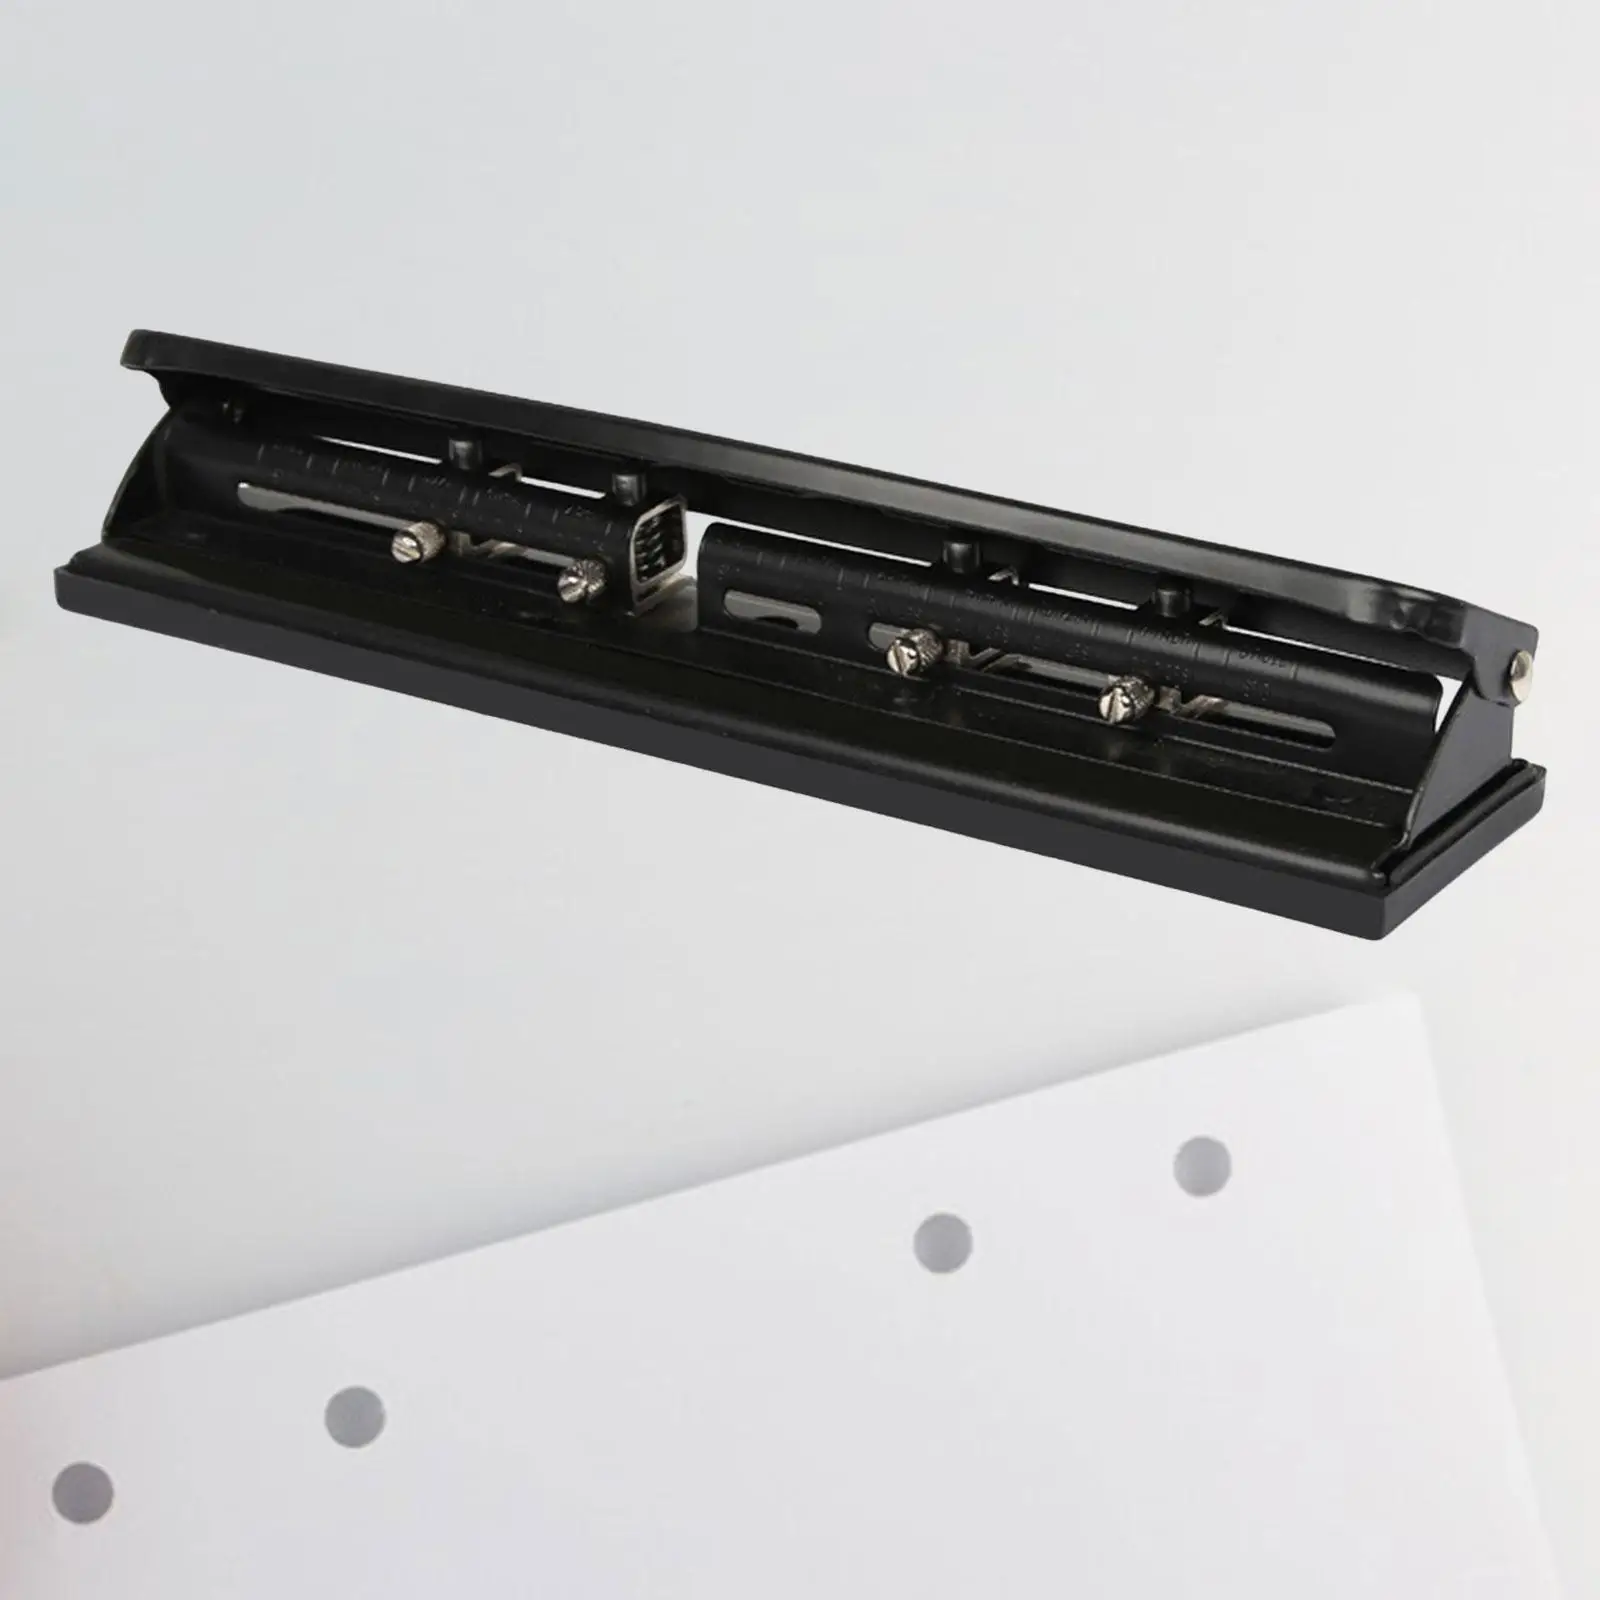 4 Hole Punch Manual File Binding Precision 10 Sheet Capacity Metal Paper Punching Machine for Working Classroom Office Learning